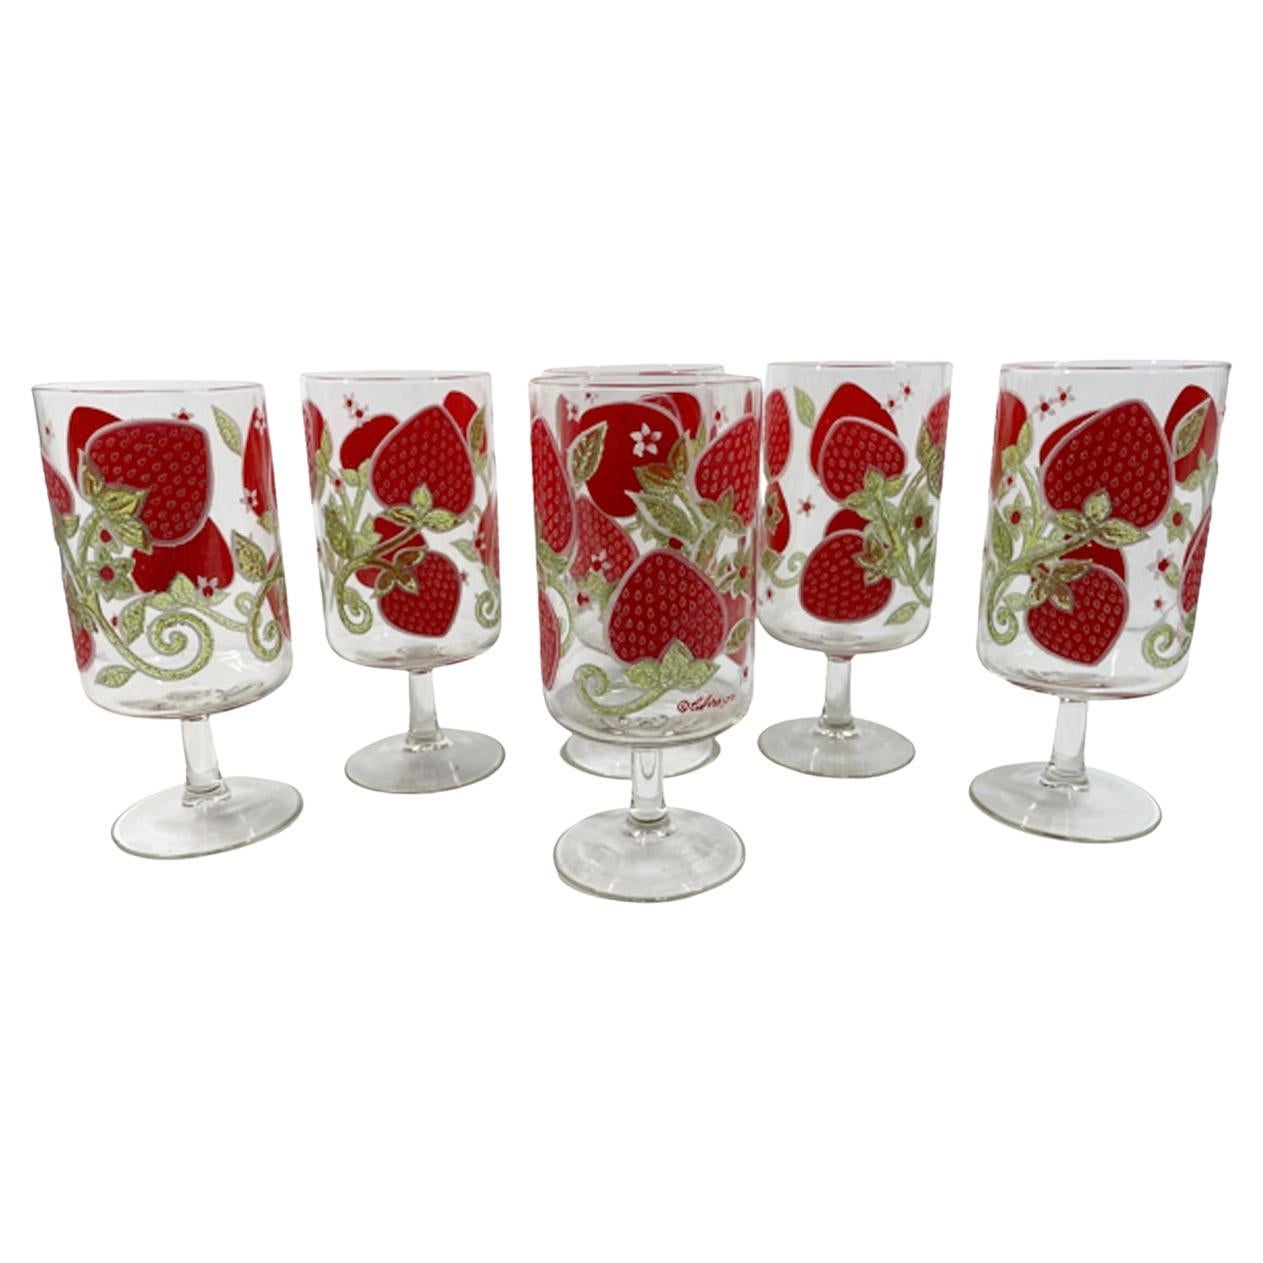 Six Culver, LTD Stemmed Coolers w/ Strawberry Pattern in Red with Green & White For Sale